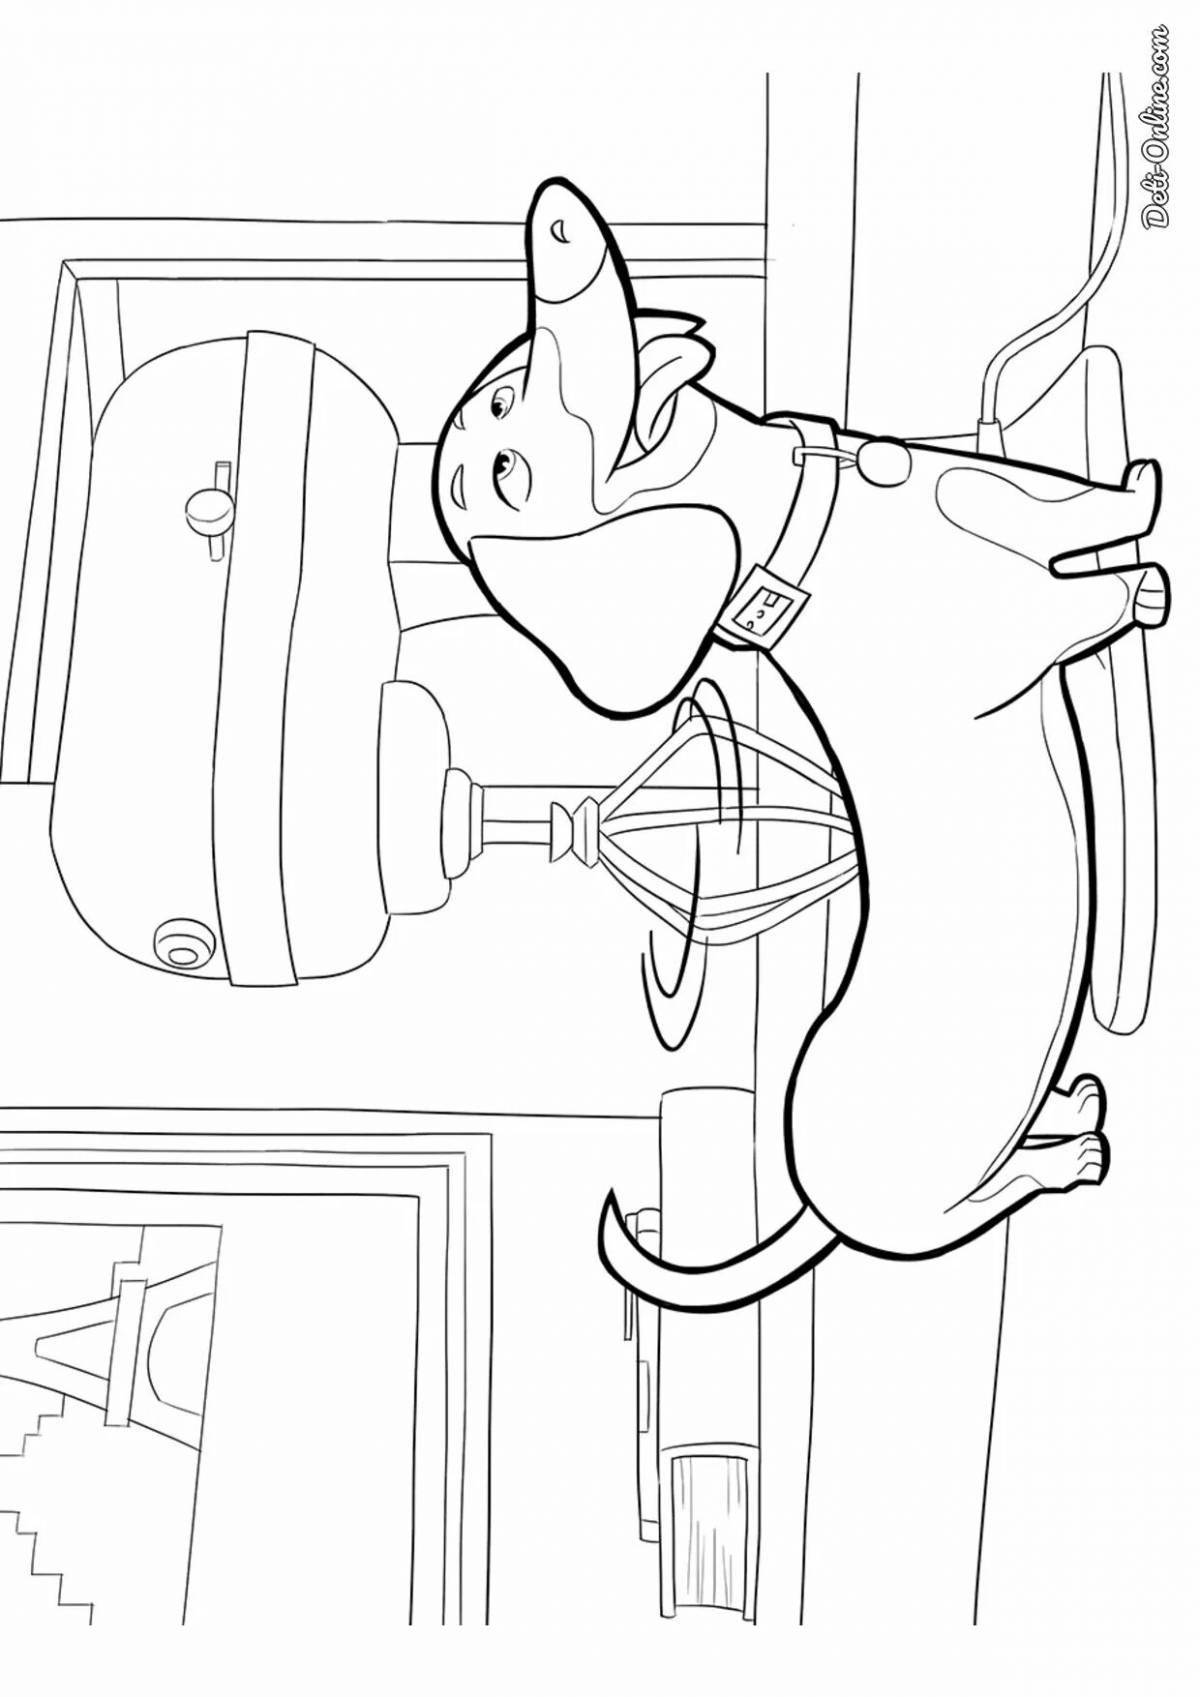 Pet life coloring page